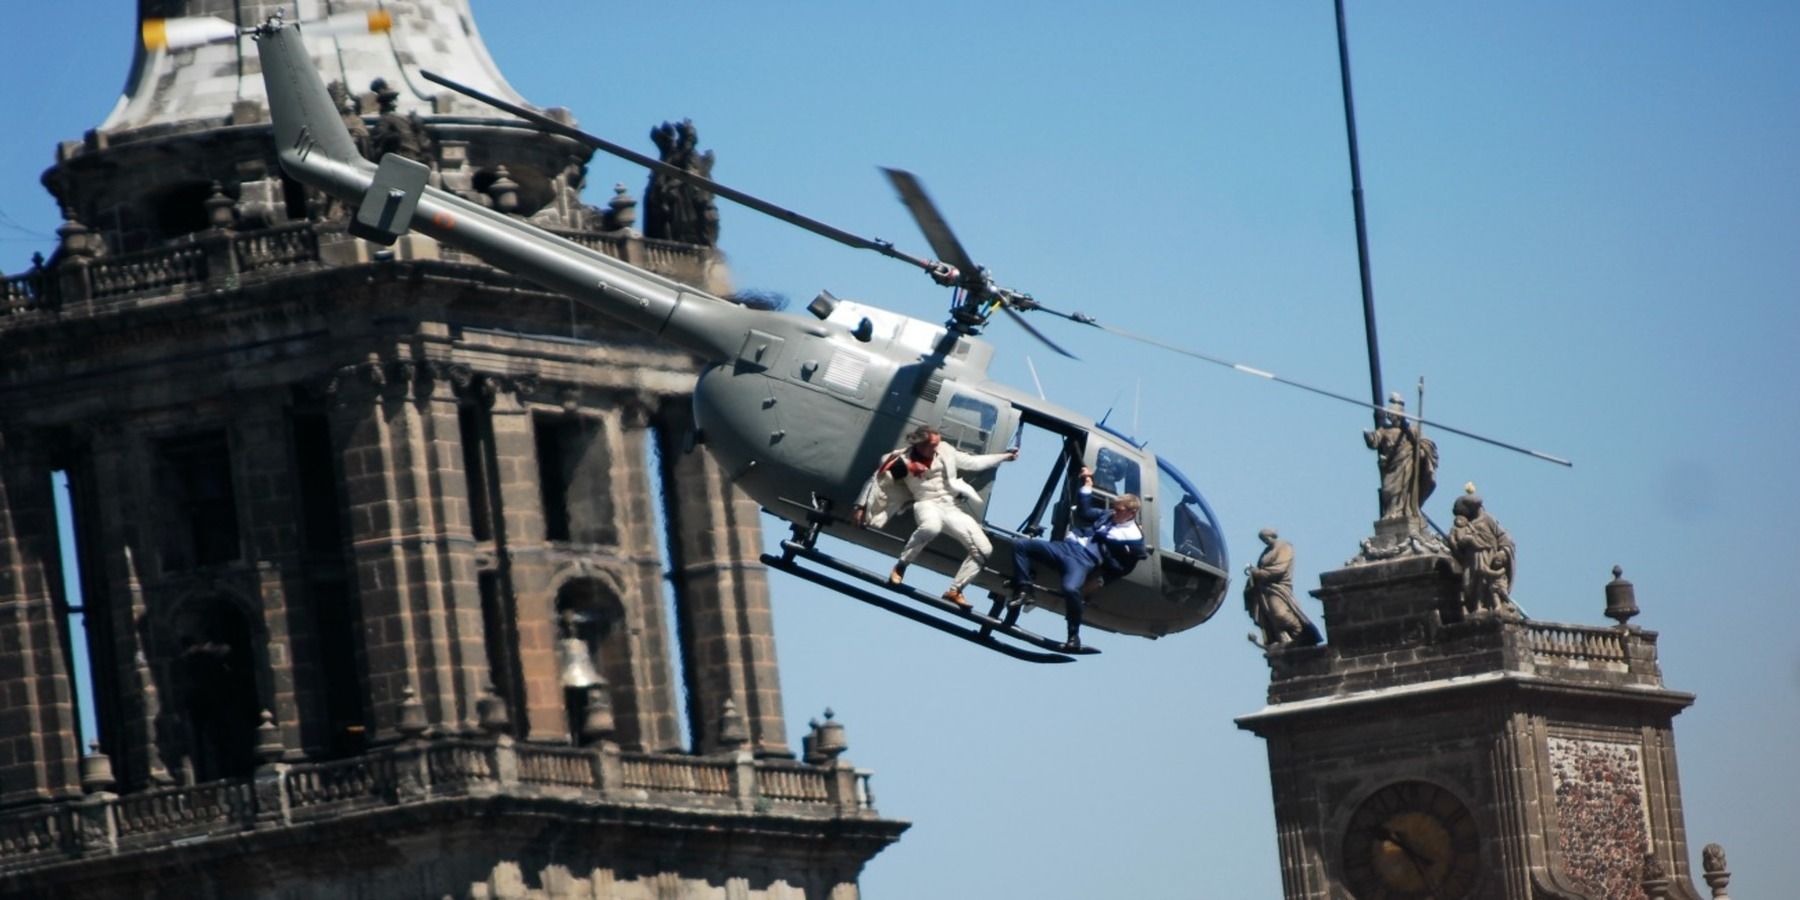 mexico_city_spectre_filming helicopter scene